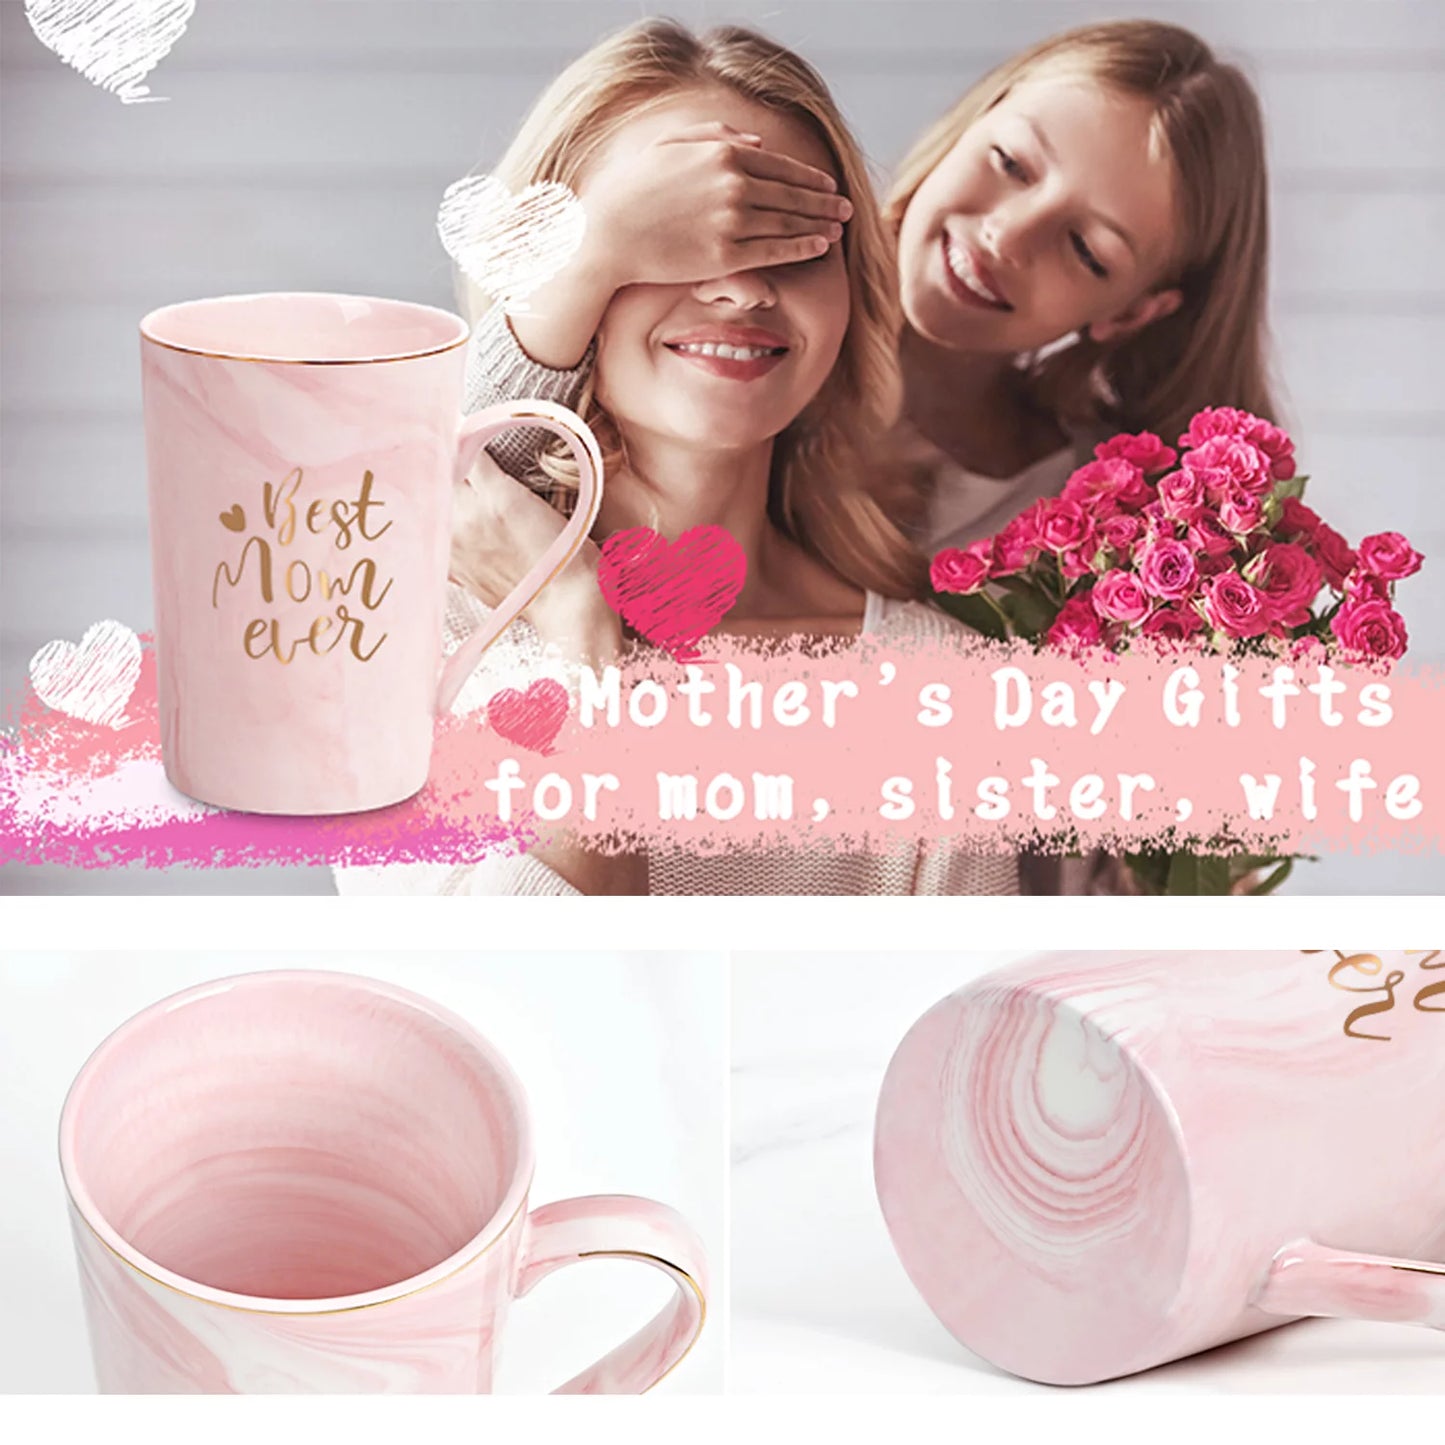 Gifts for Mom - Best Mom Ever Coffee Mug, Best Mom Gifts for Mothers Day, Christmas, Birthday, 14 Fl Oz Pink Coffee Mugs Ceramic Coffee Mug Tea Cup, Mother'S Day Gifts - Design By Technique